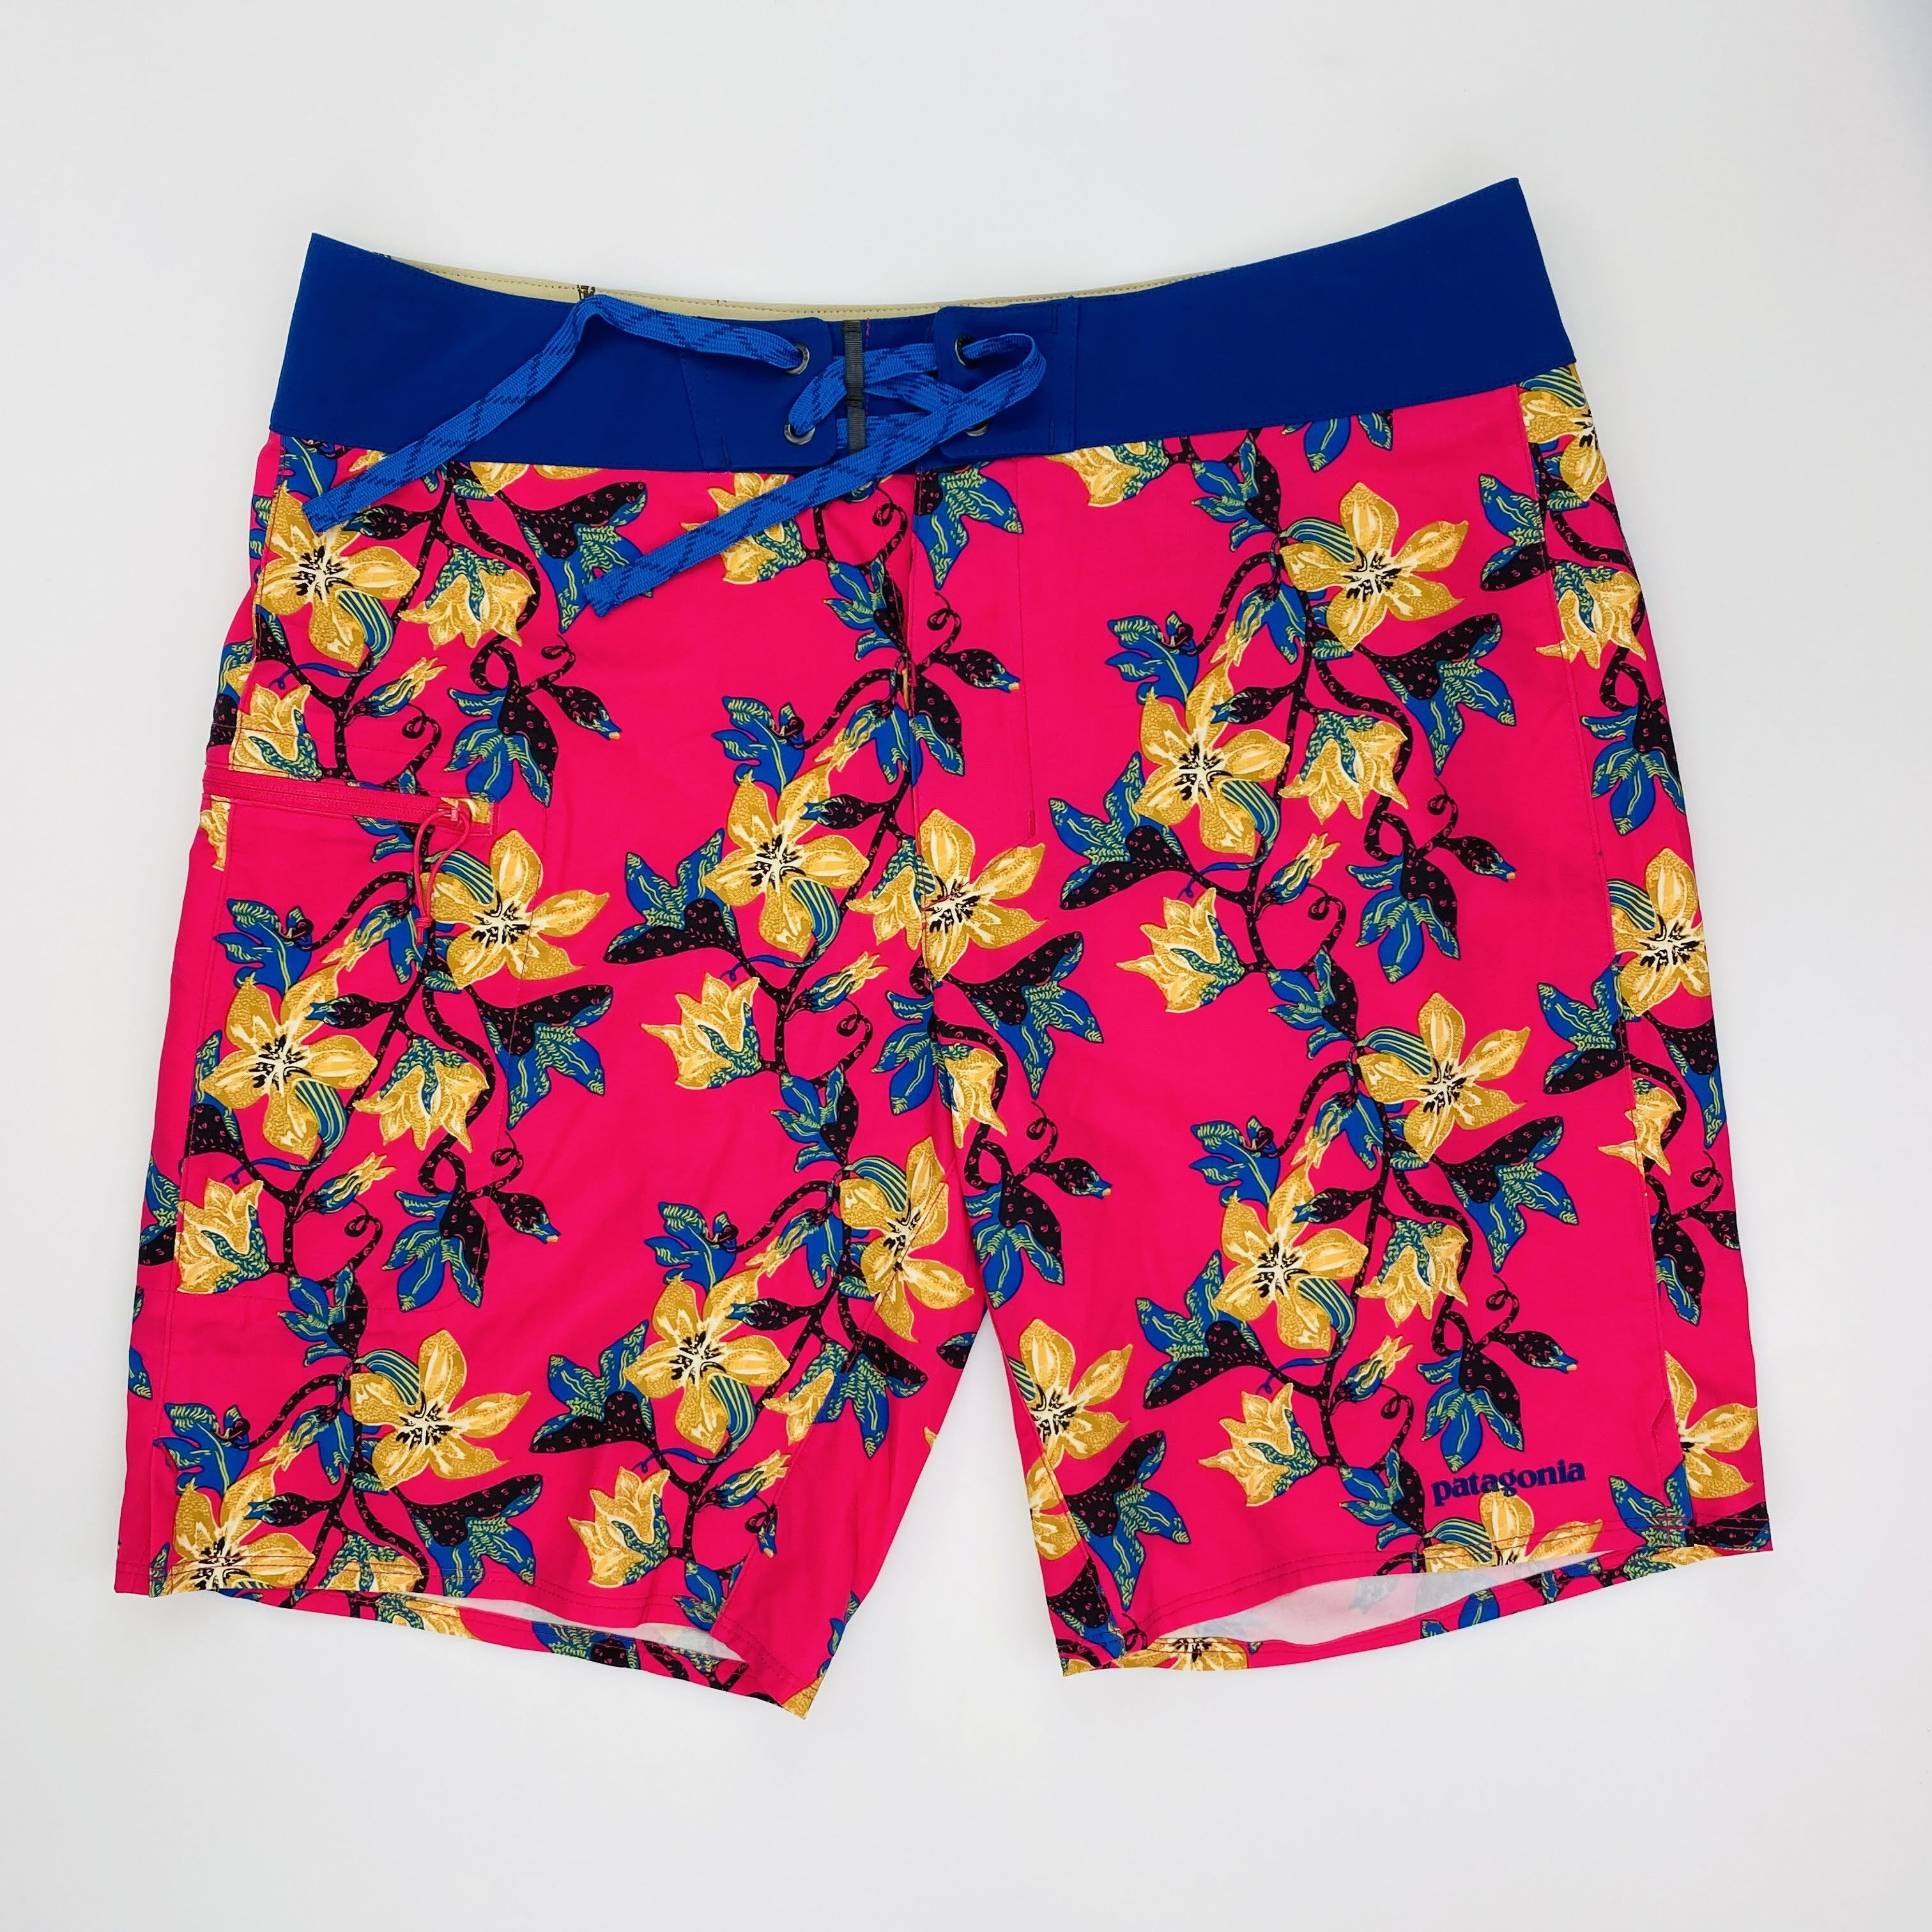 Patagonia M's Stretch Planing Boardshorts - 19 in. - Seconde main Short homme - Multicolore - 42 | Hardloop